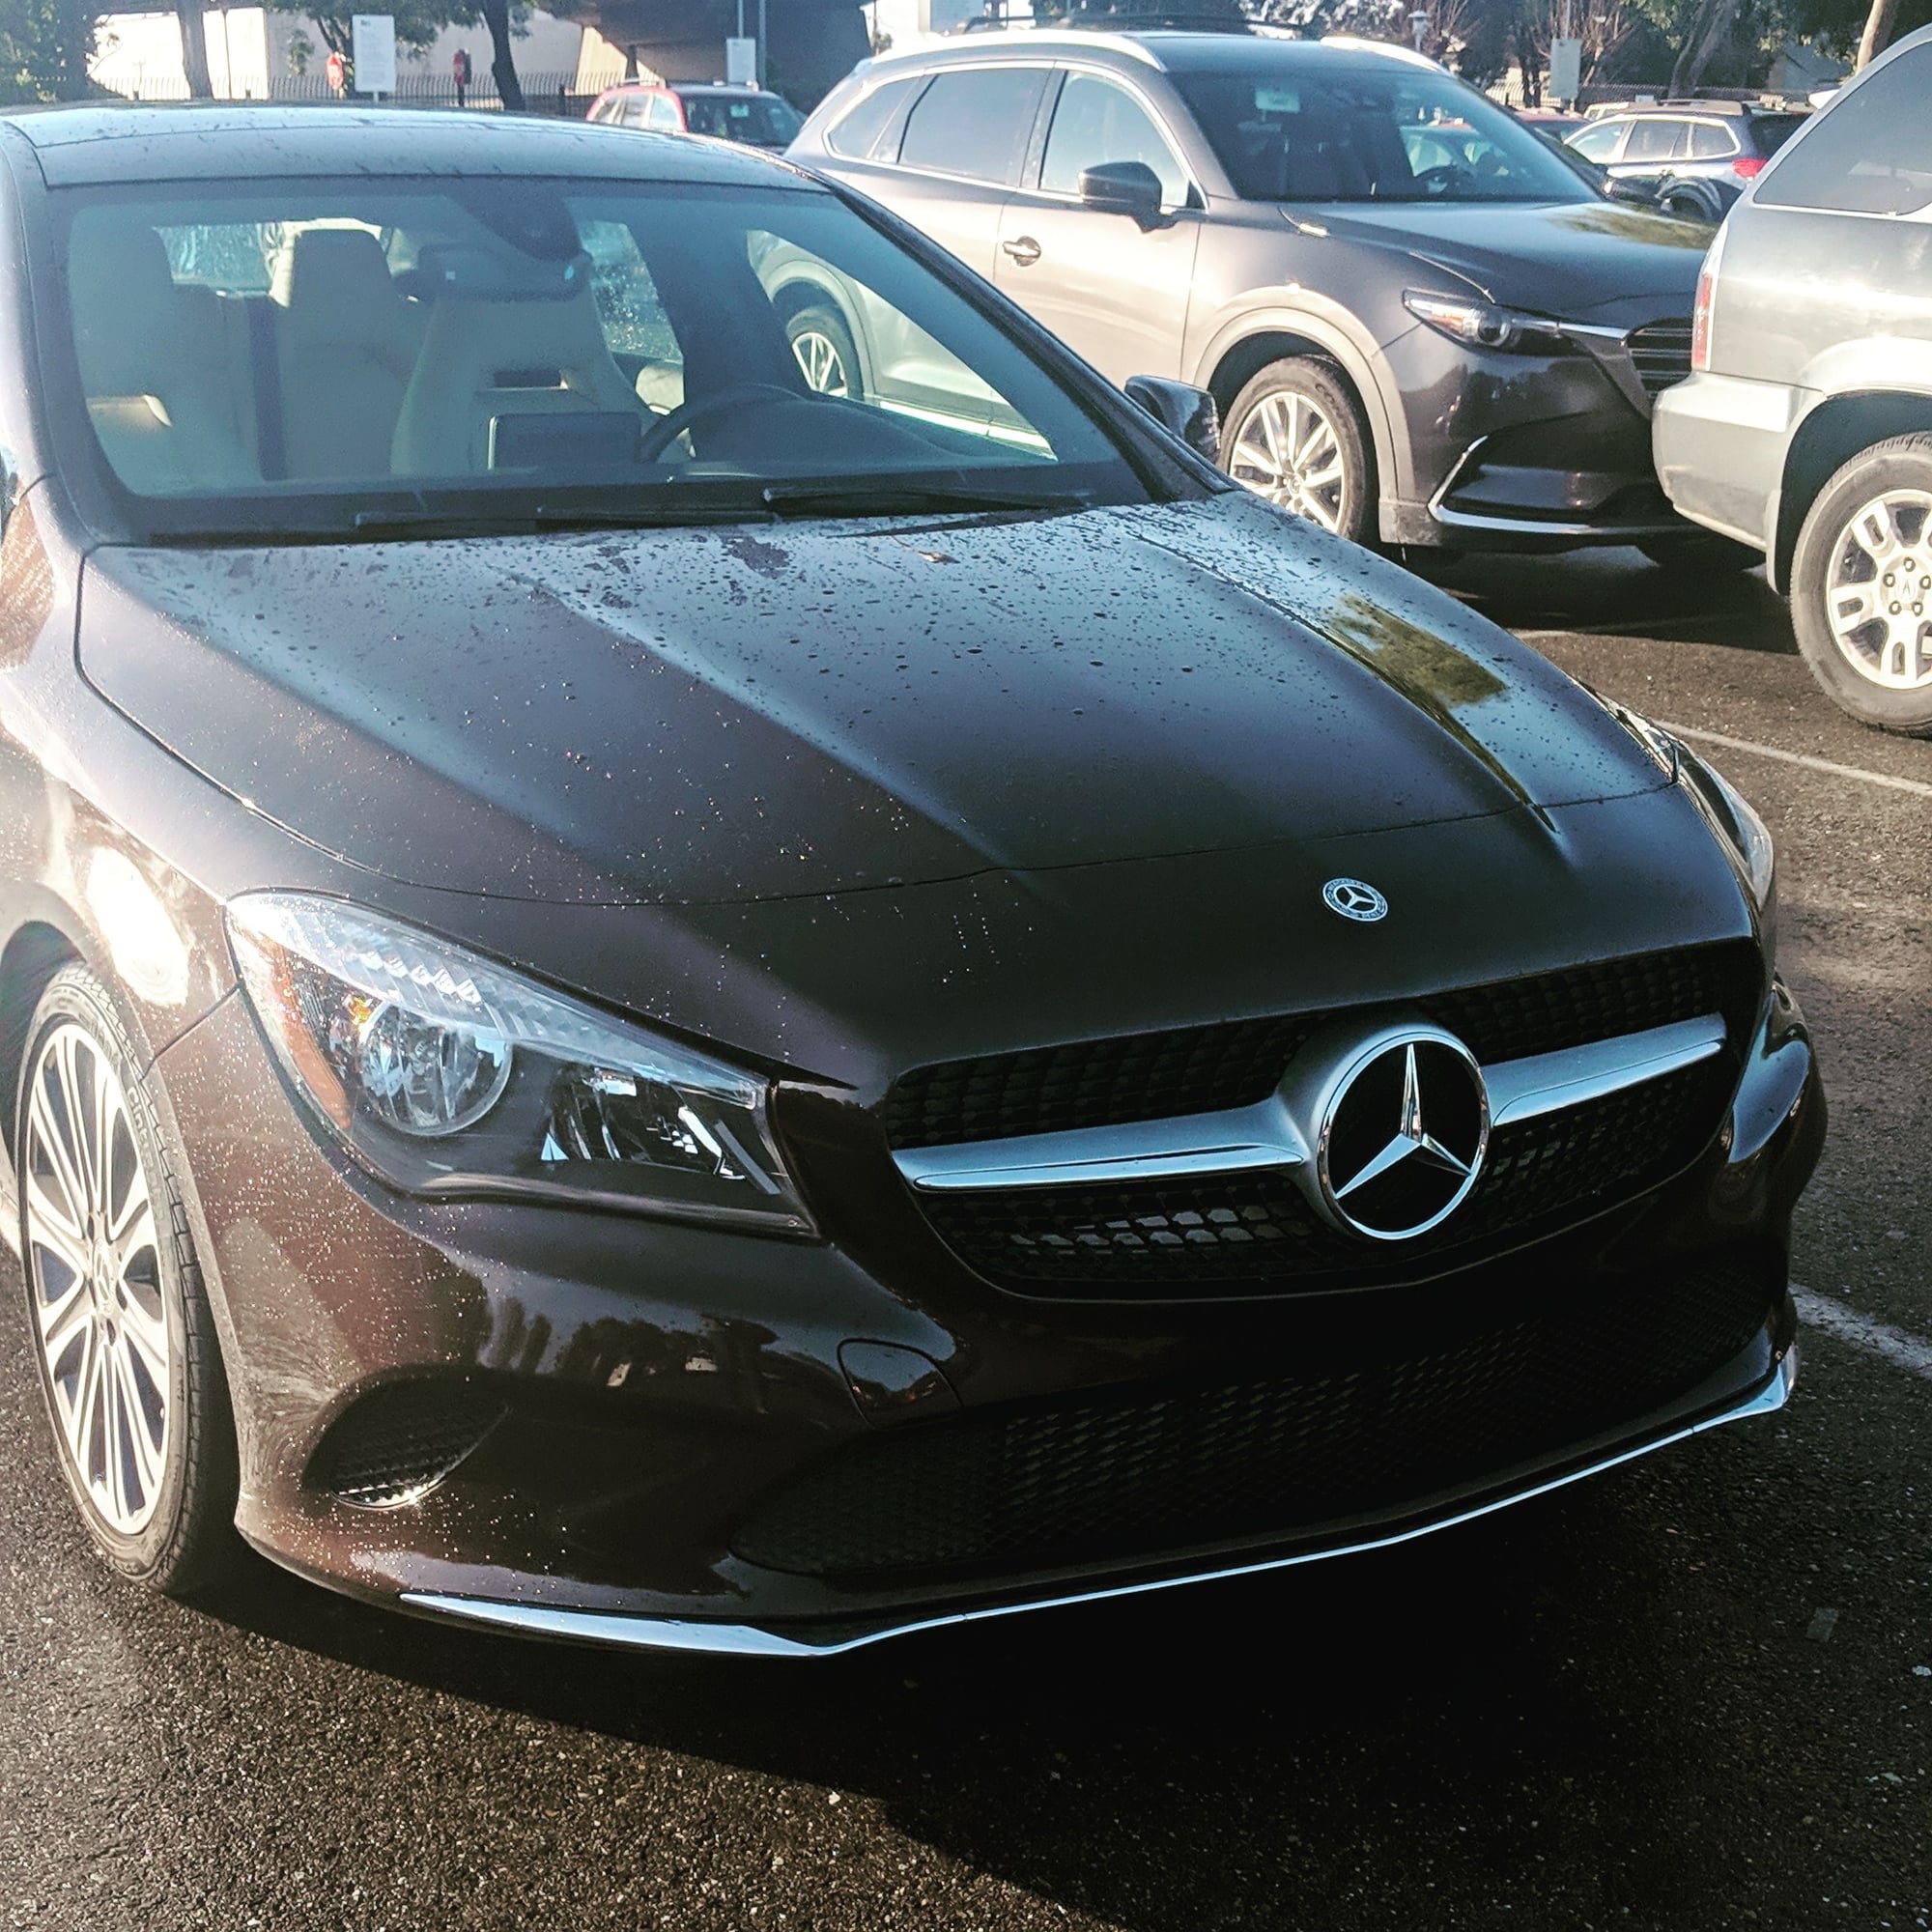 2018 Mercedes-Benz CLA250 - Lease Transfer $350 (Monthly) - Used - VIN WDDSJ4EB7JN584432 - 4,000 Miles - Automatic - Coupe - Brown - Walnut Creek, CA 94507, United States